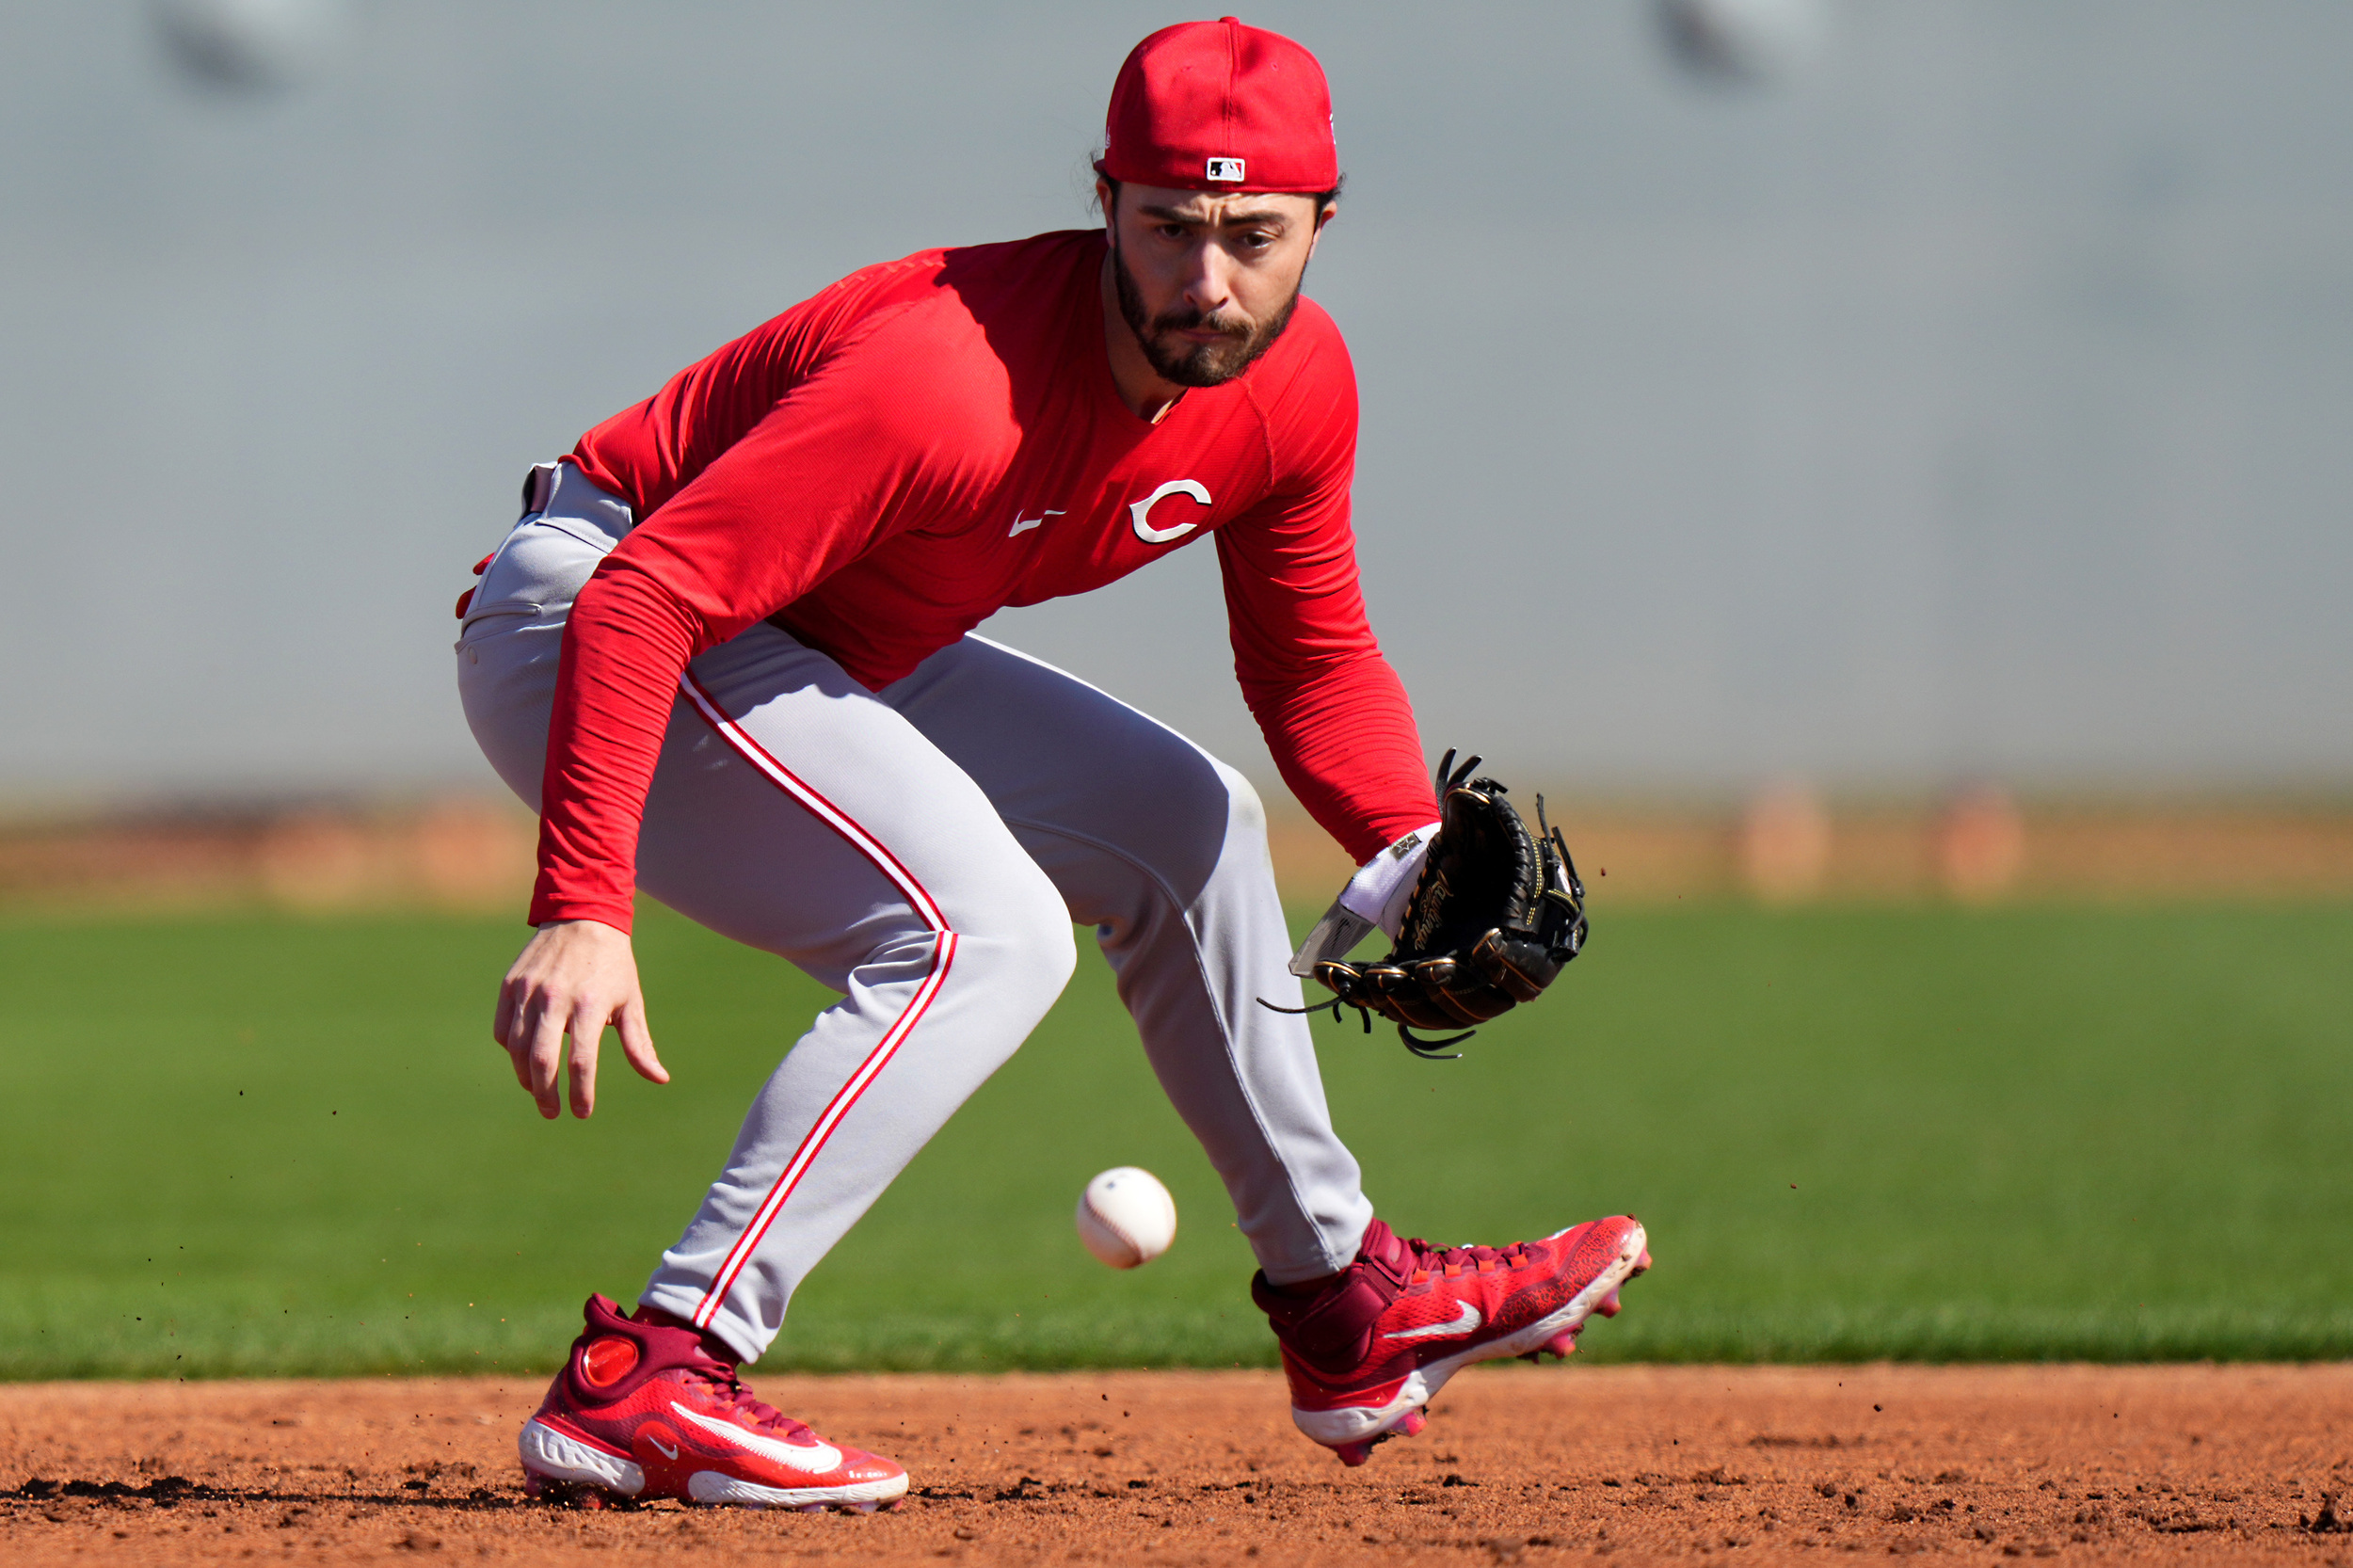 reds relying on familiar face amid depleted infield depth